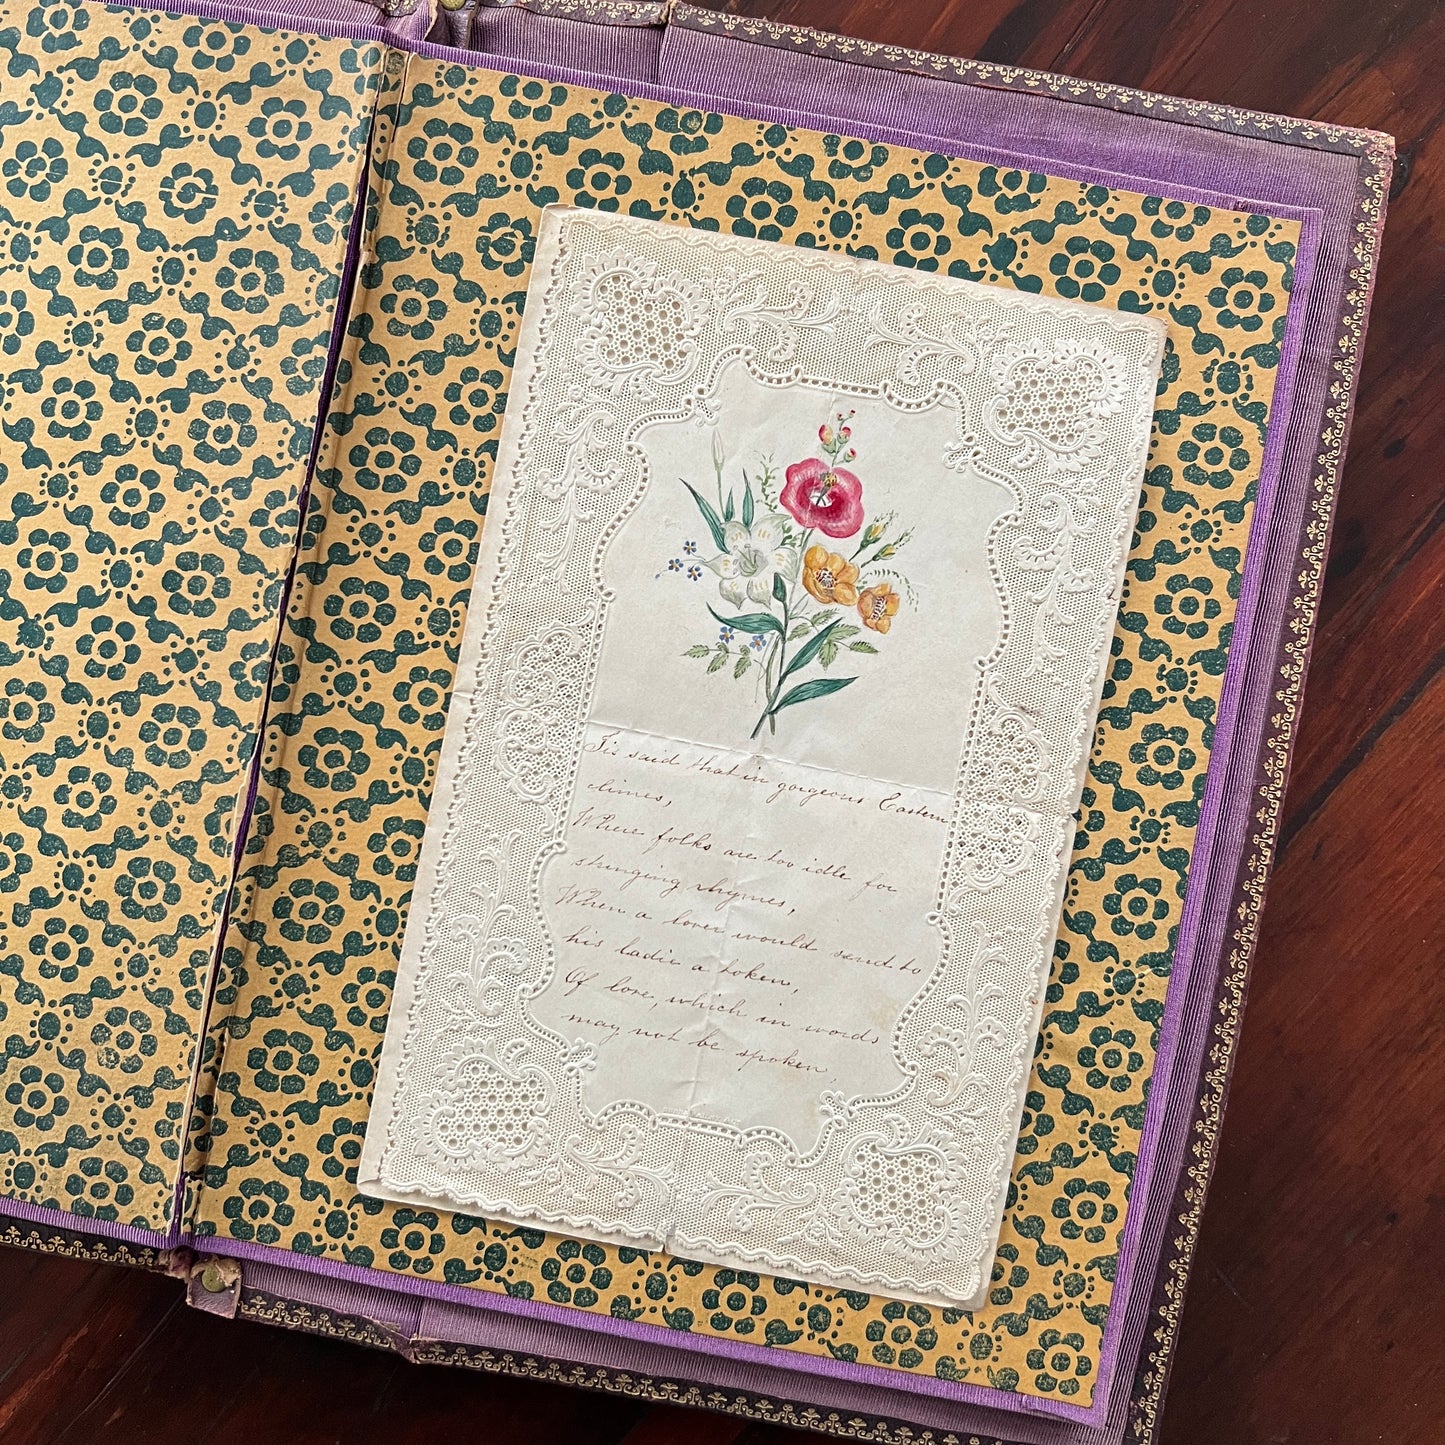 c. 1850s Embossed Lace Valentine Card with Hand-painted Flowers and Hand-written Poem